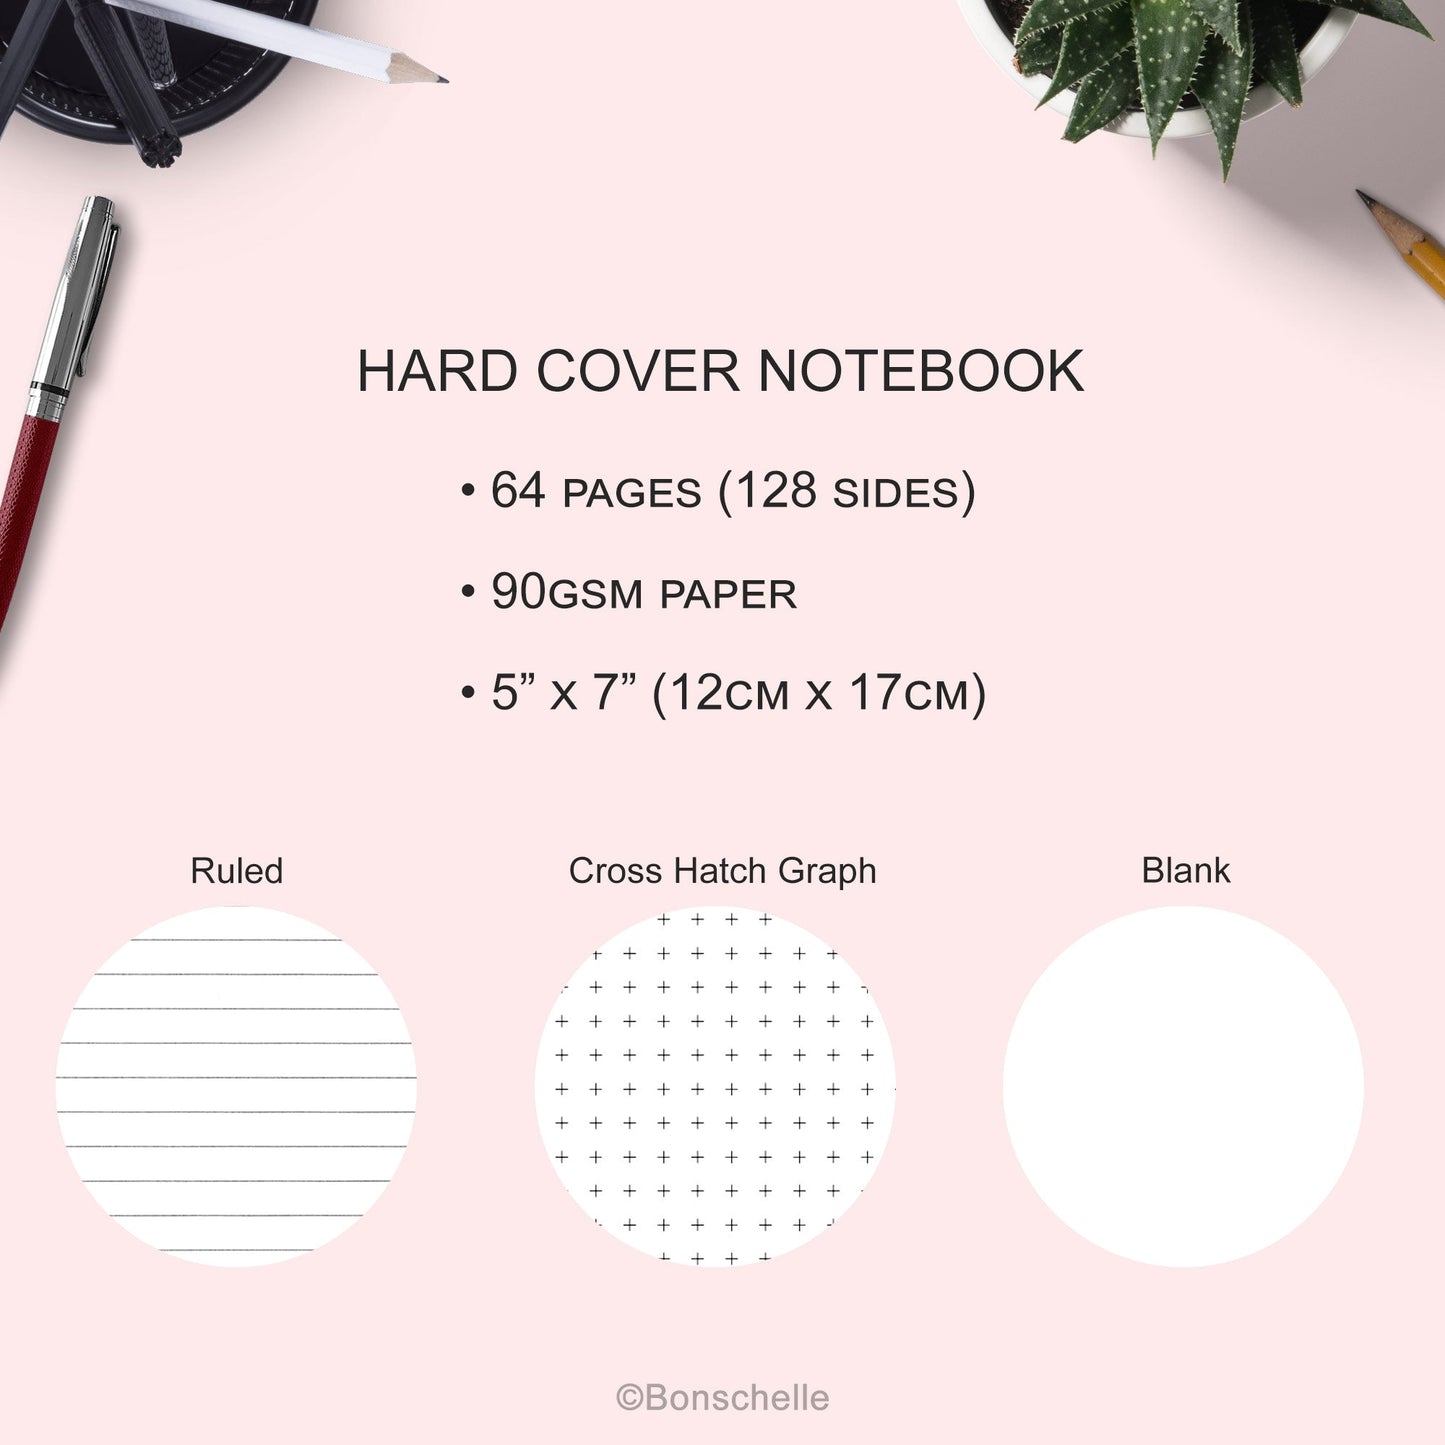 Hardcover Journal Notebook details and paper options